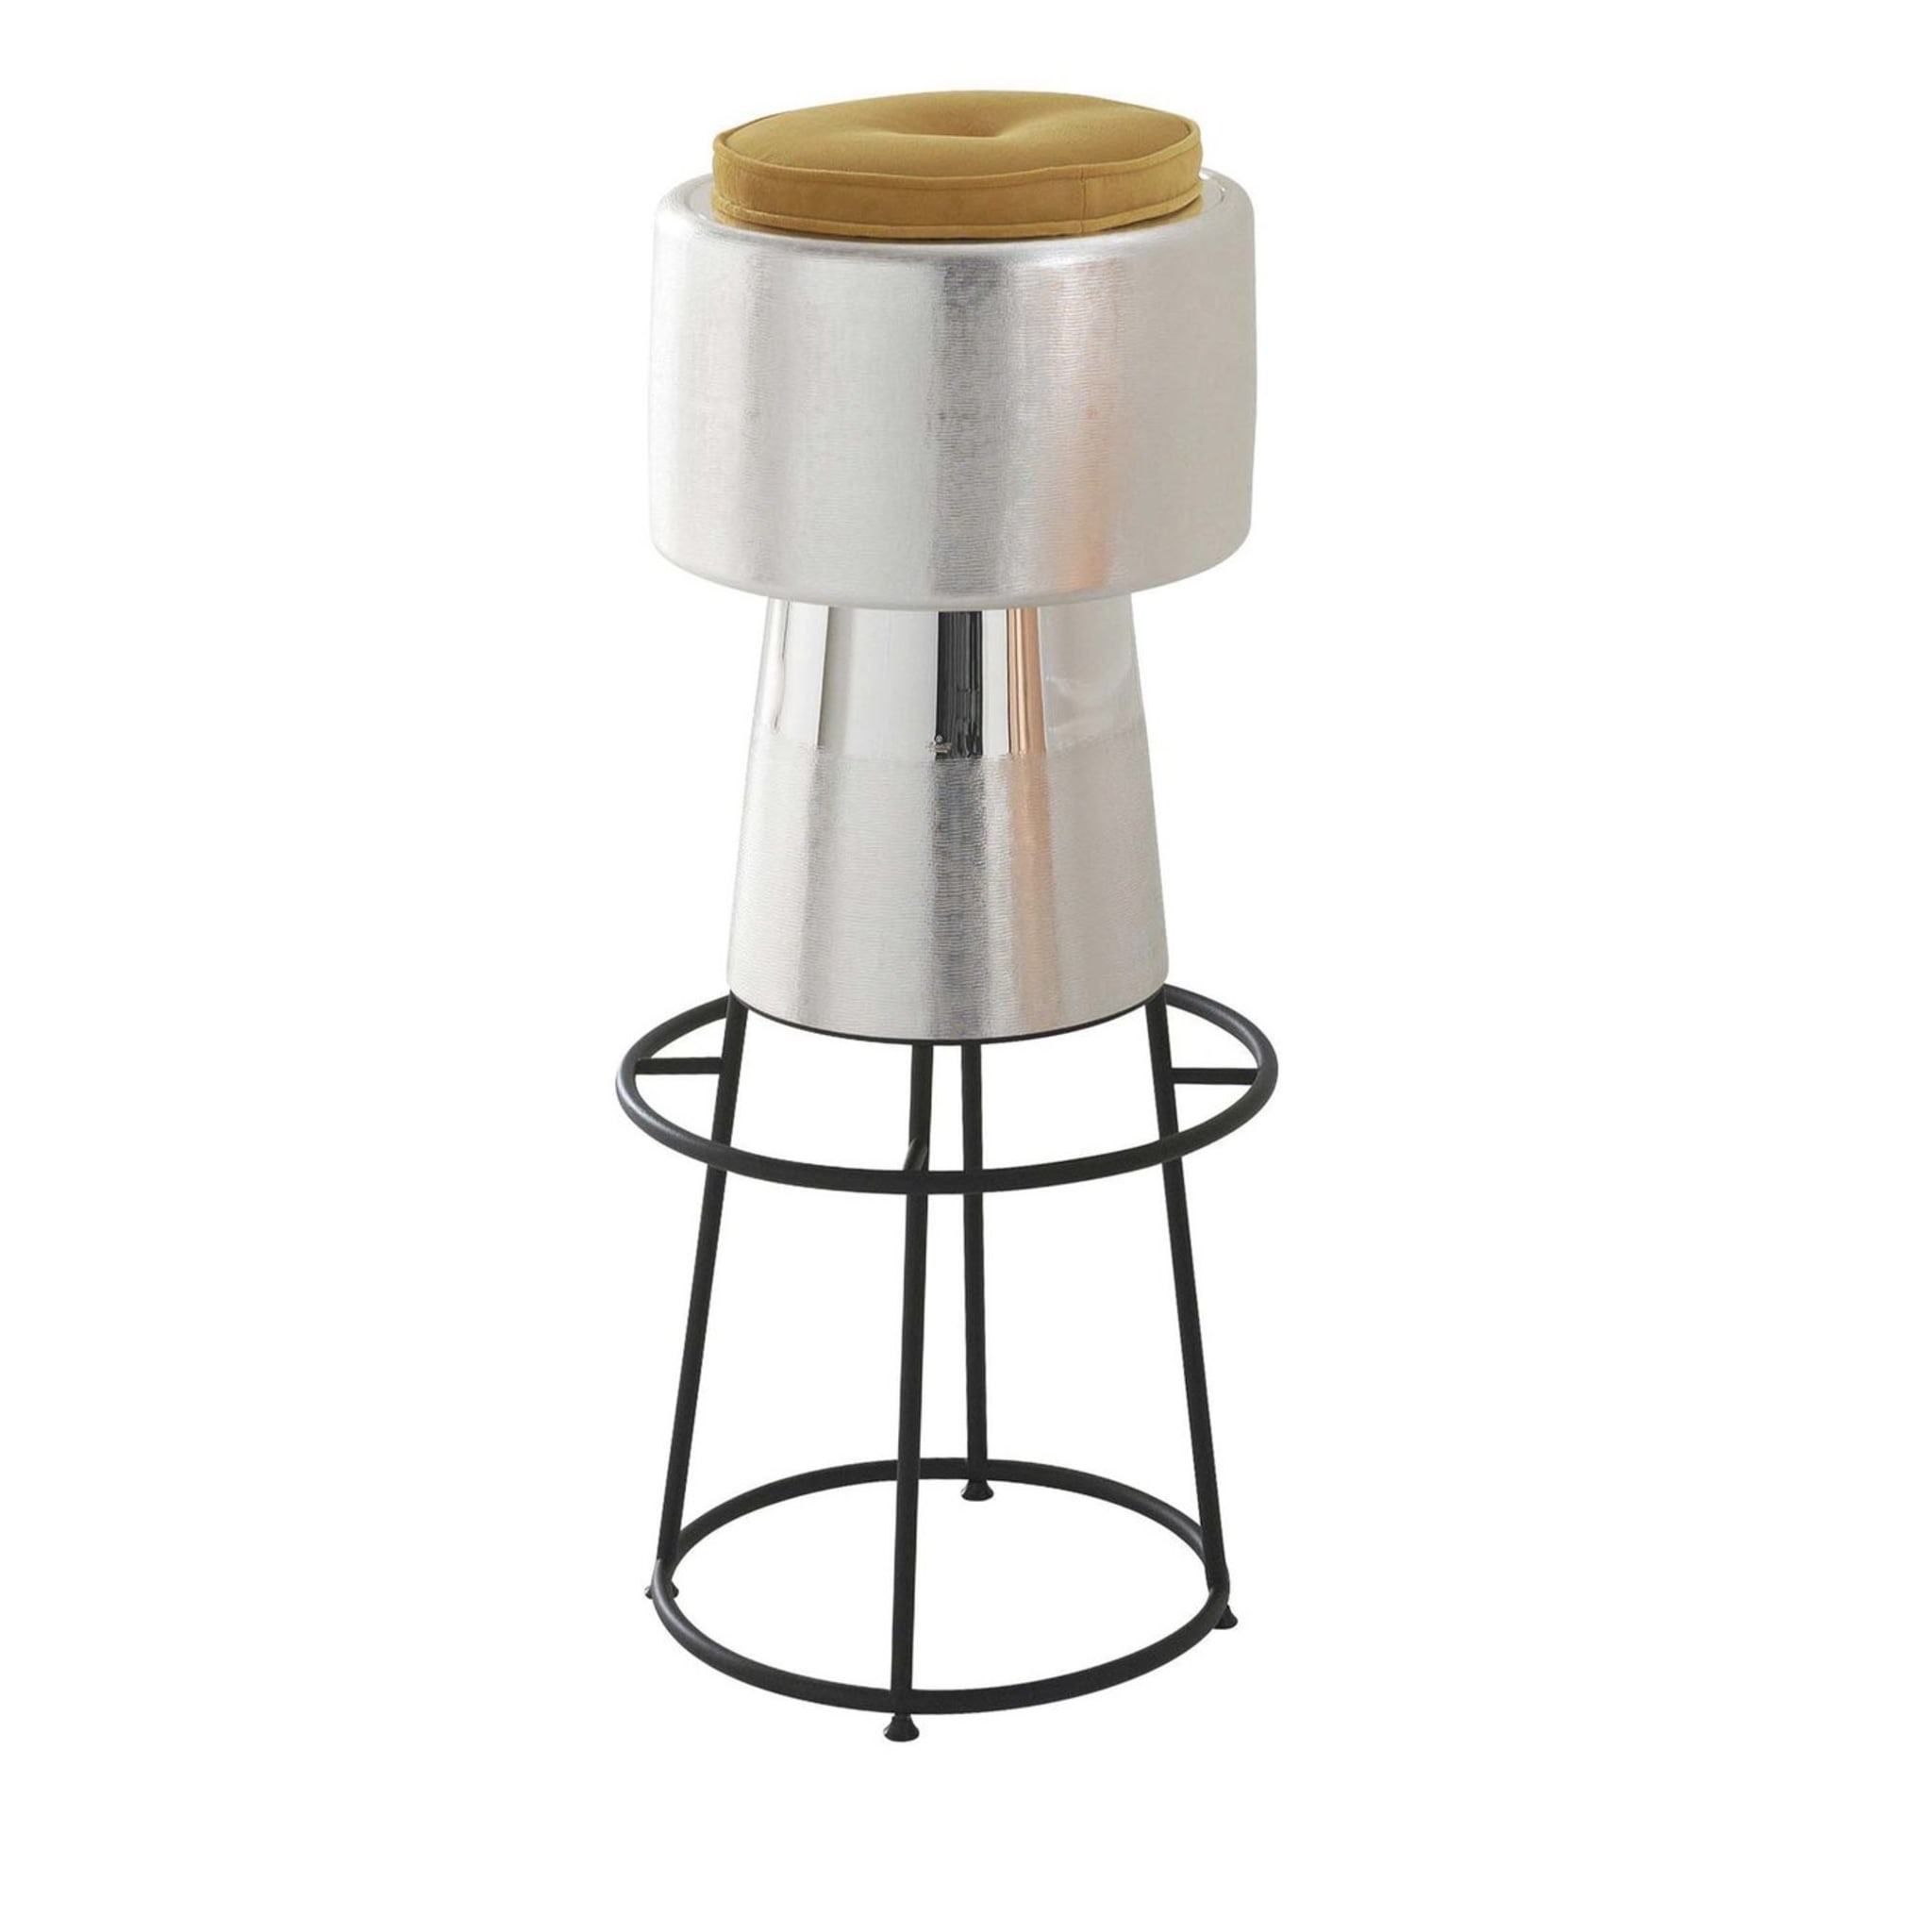 Tappo Silver Bar Stool by NOOII - Main view